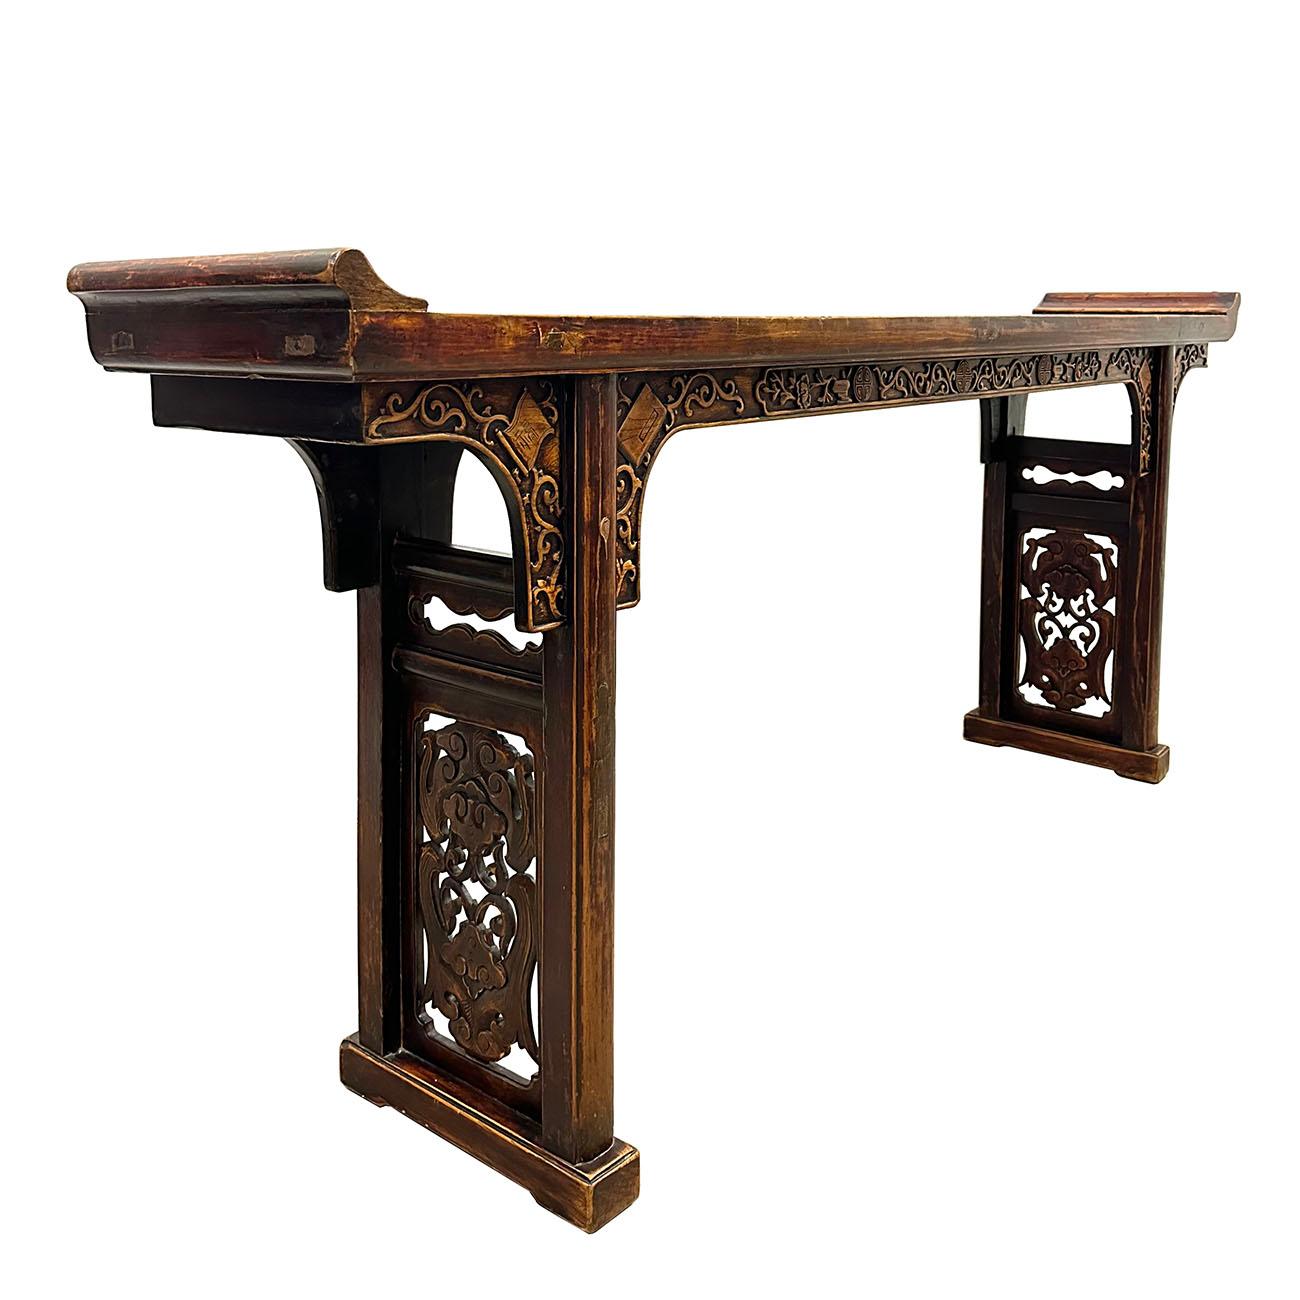 This Antique Carved Altar table from China was made in late 19th century and still maintained very good condition. It shows the traditional style of Northern China's cultural. This Chinese antique altar table was made from solid wood with raised